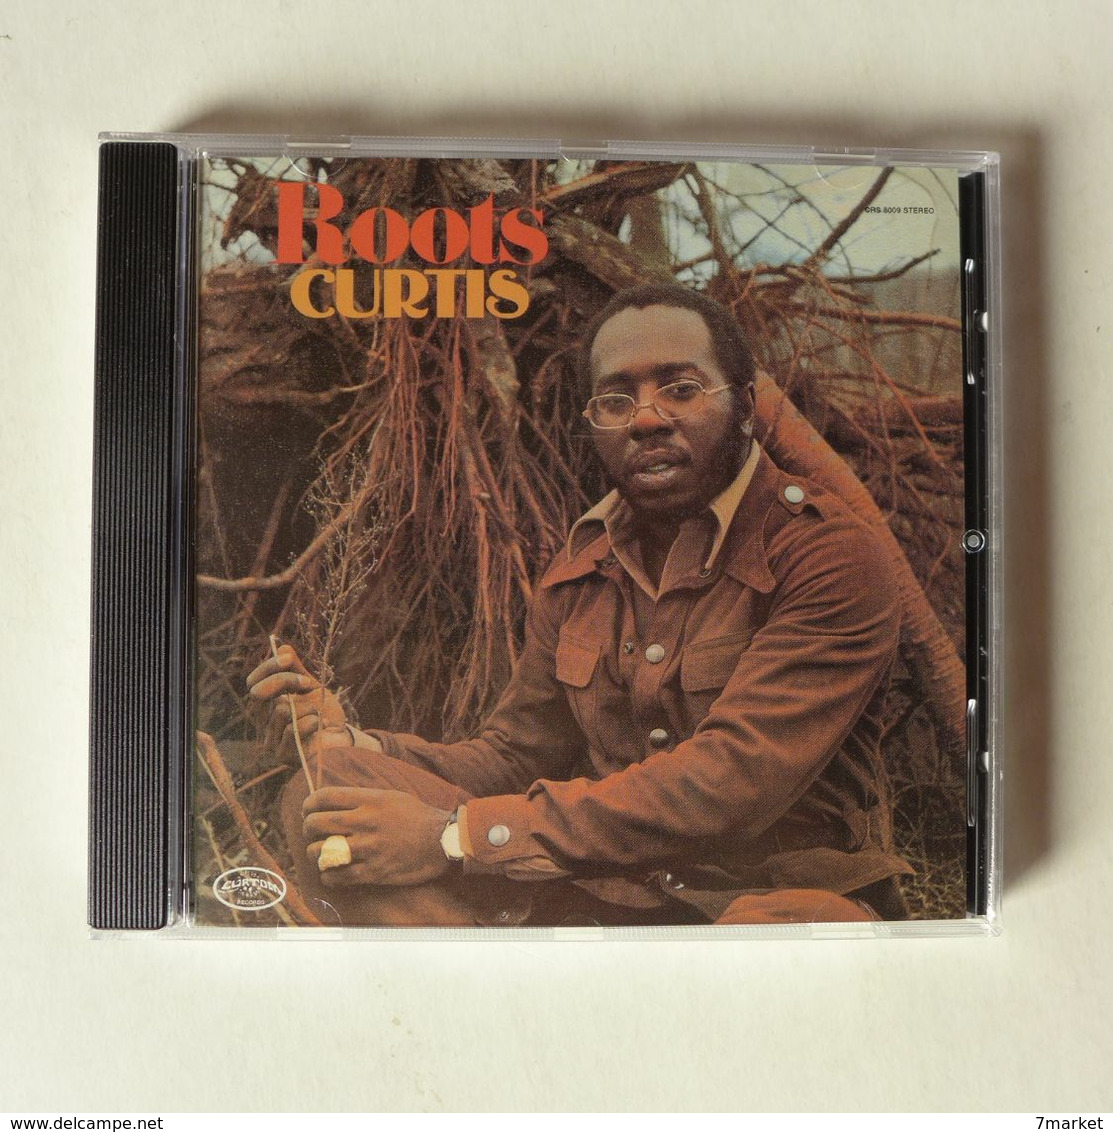 CD/ Curtis Mayfield - Roots - Soul - R&B